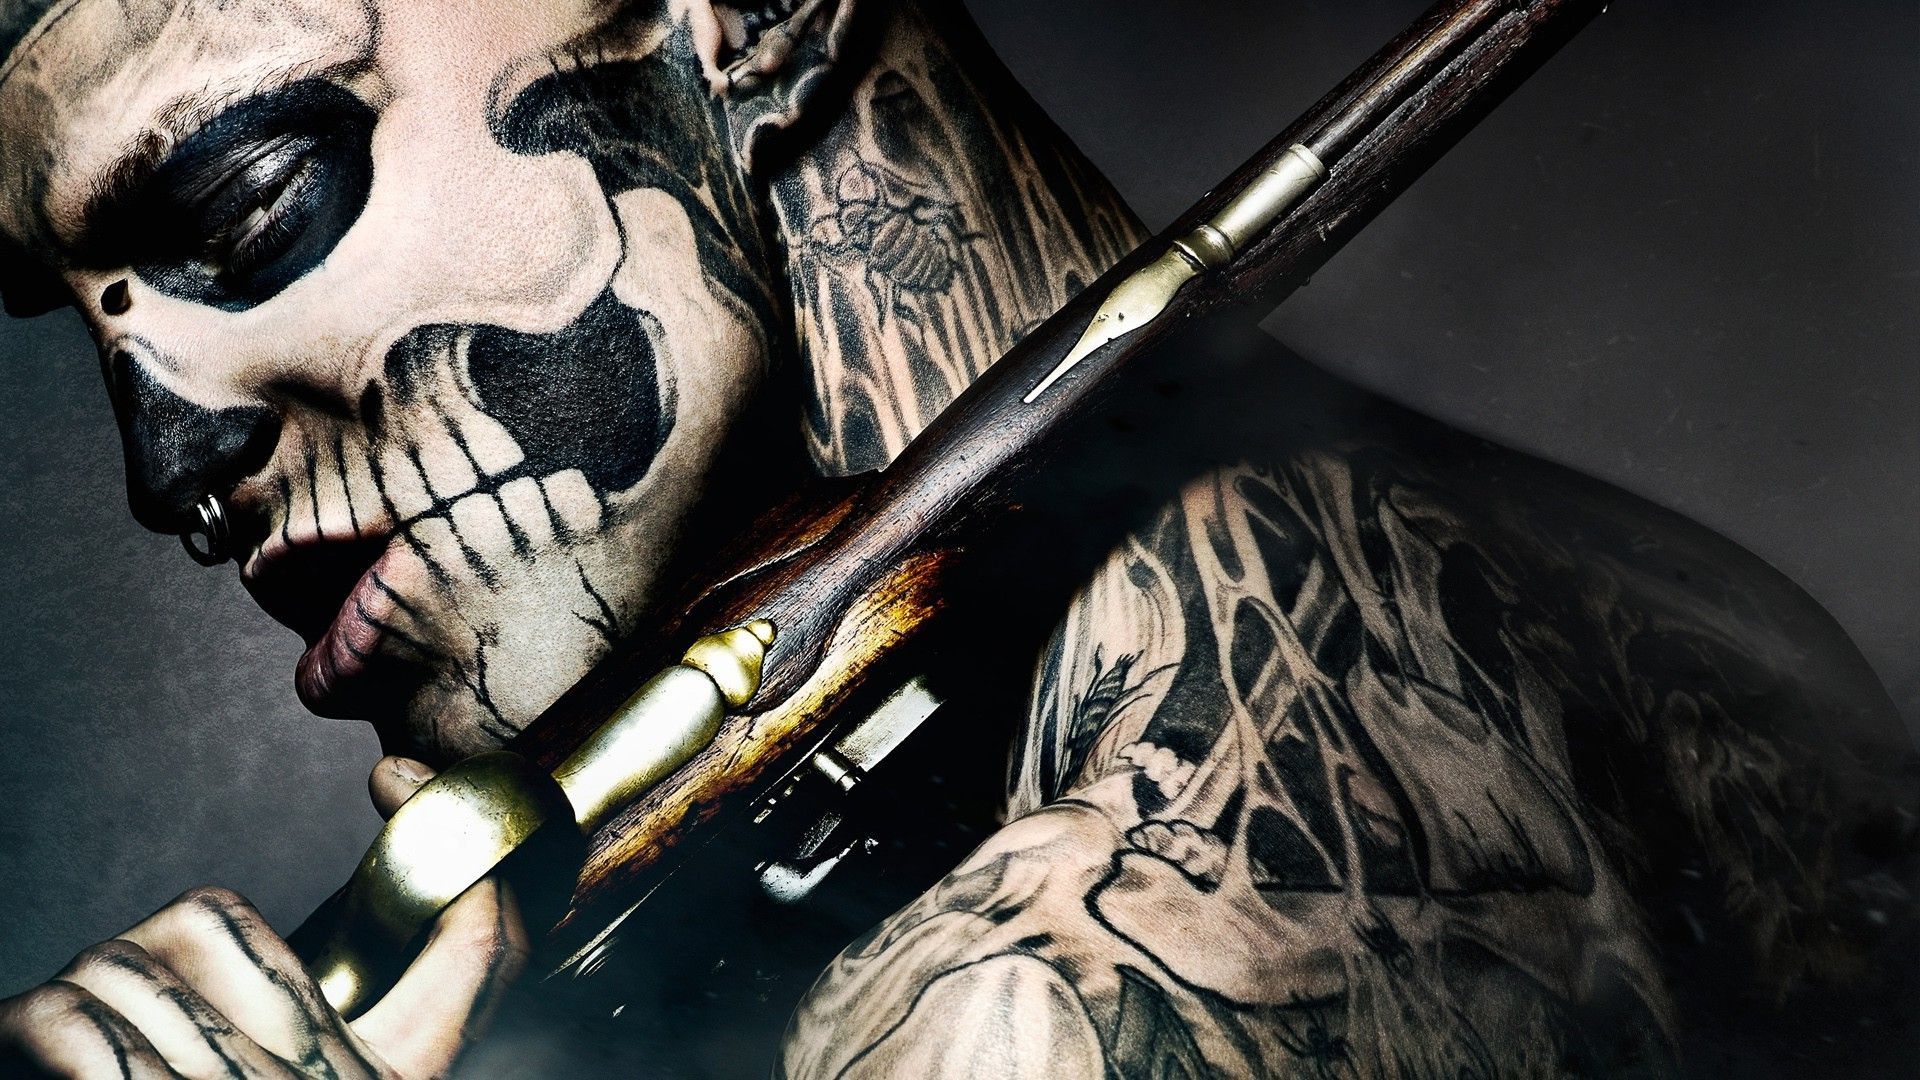 Tattoos old mobile, cell phone, smartphone wallpapers hd, desktop  backgrounds 240x320, images and pictures